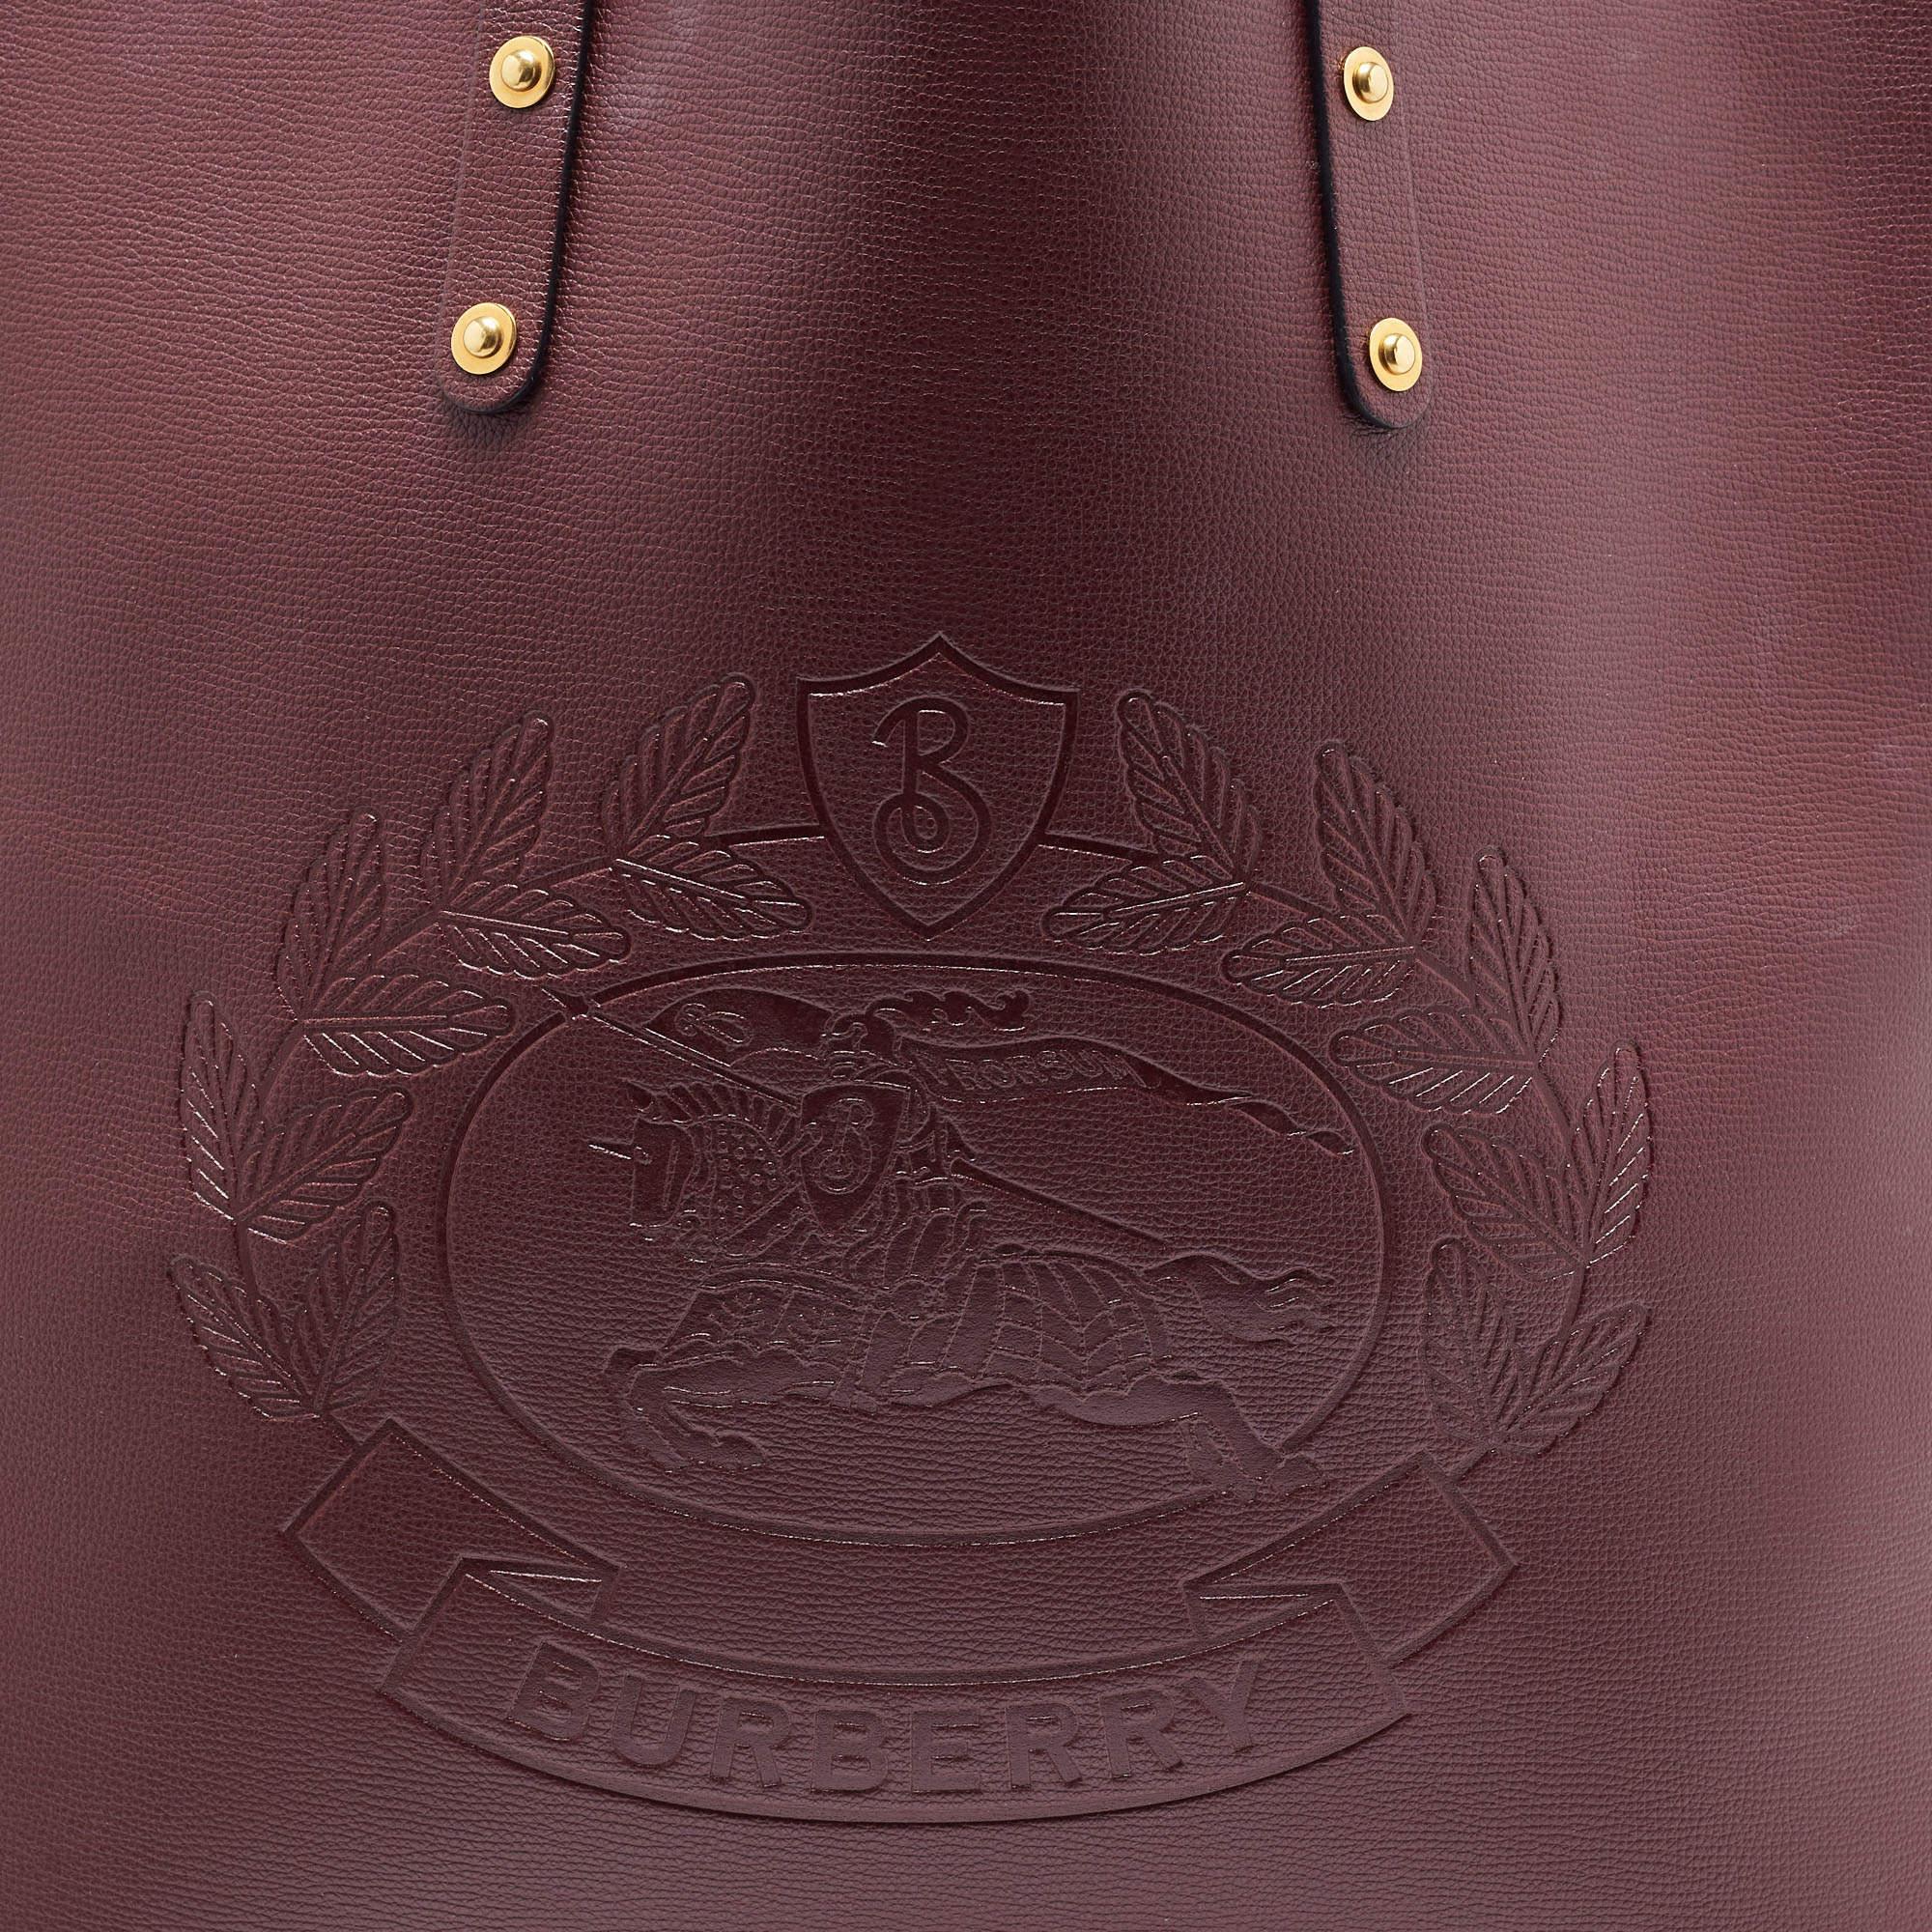 Burberry Burgundy Leather Large Embossed Crest Tote 6